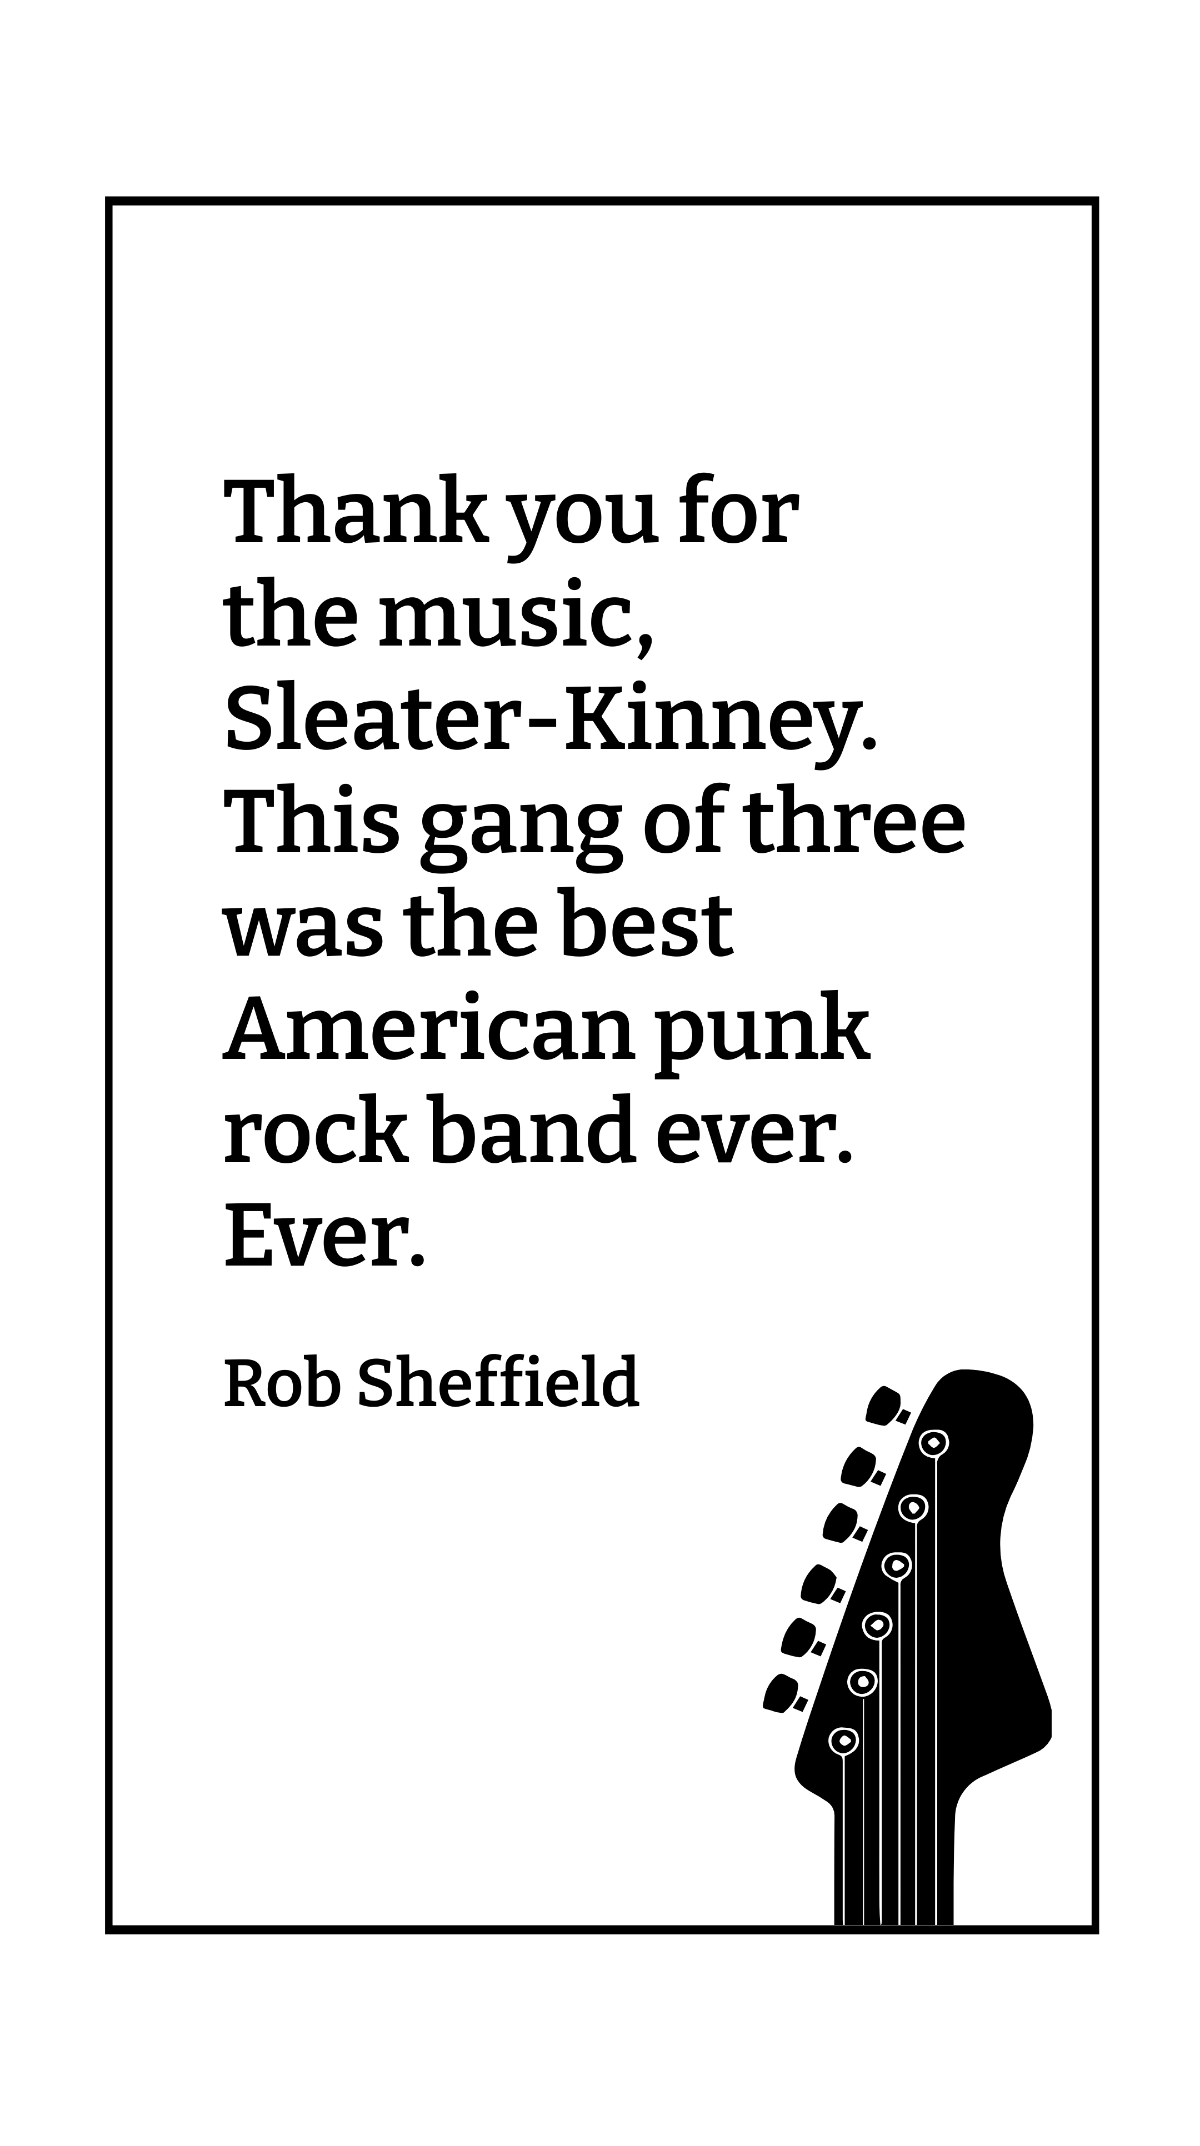 Free Rob Sheffield - Thank you for the music, Sleater-Kinney. This gang of three was the best American punk rock band ever. Ever. Template